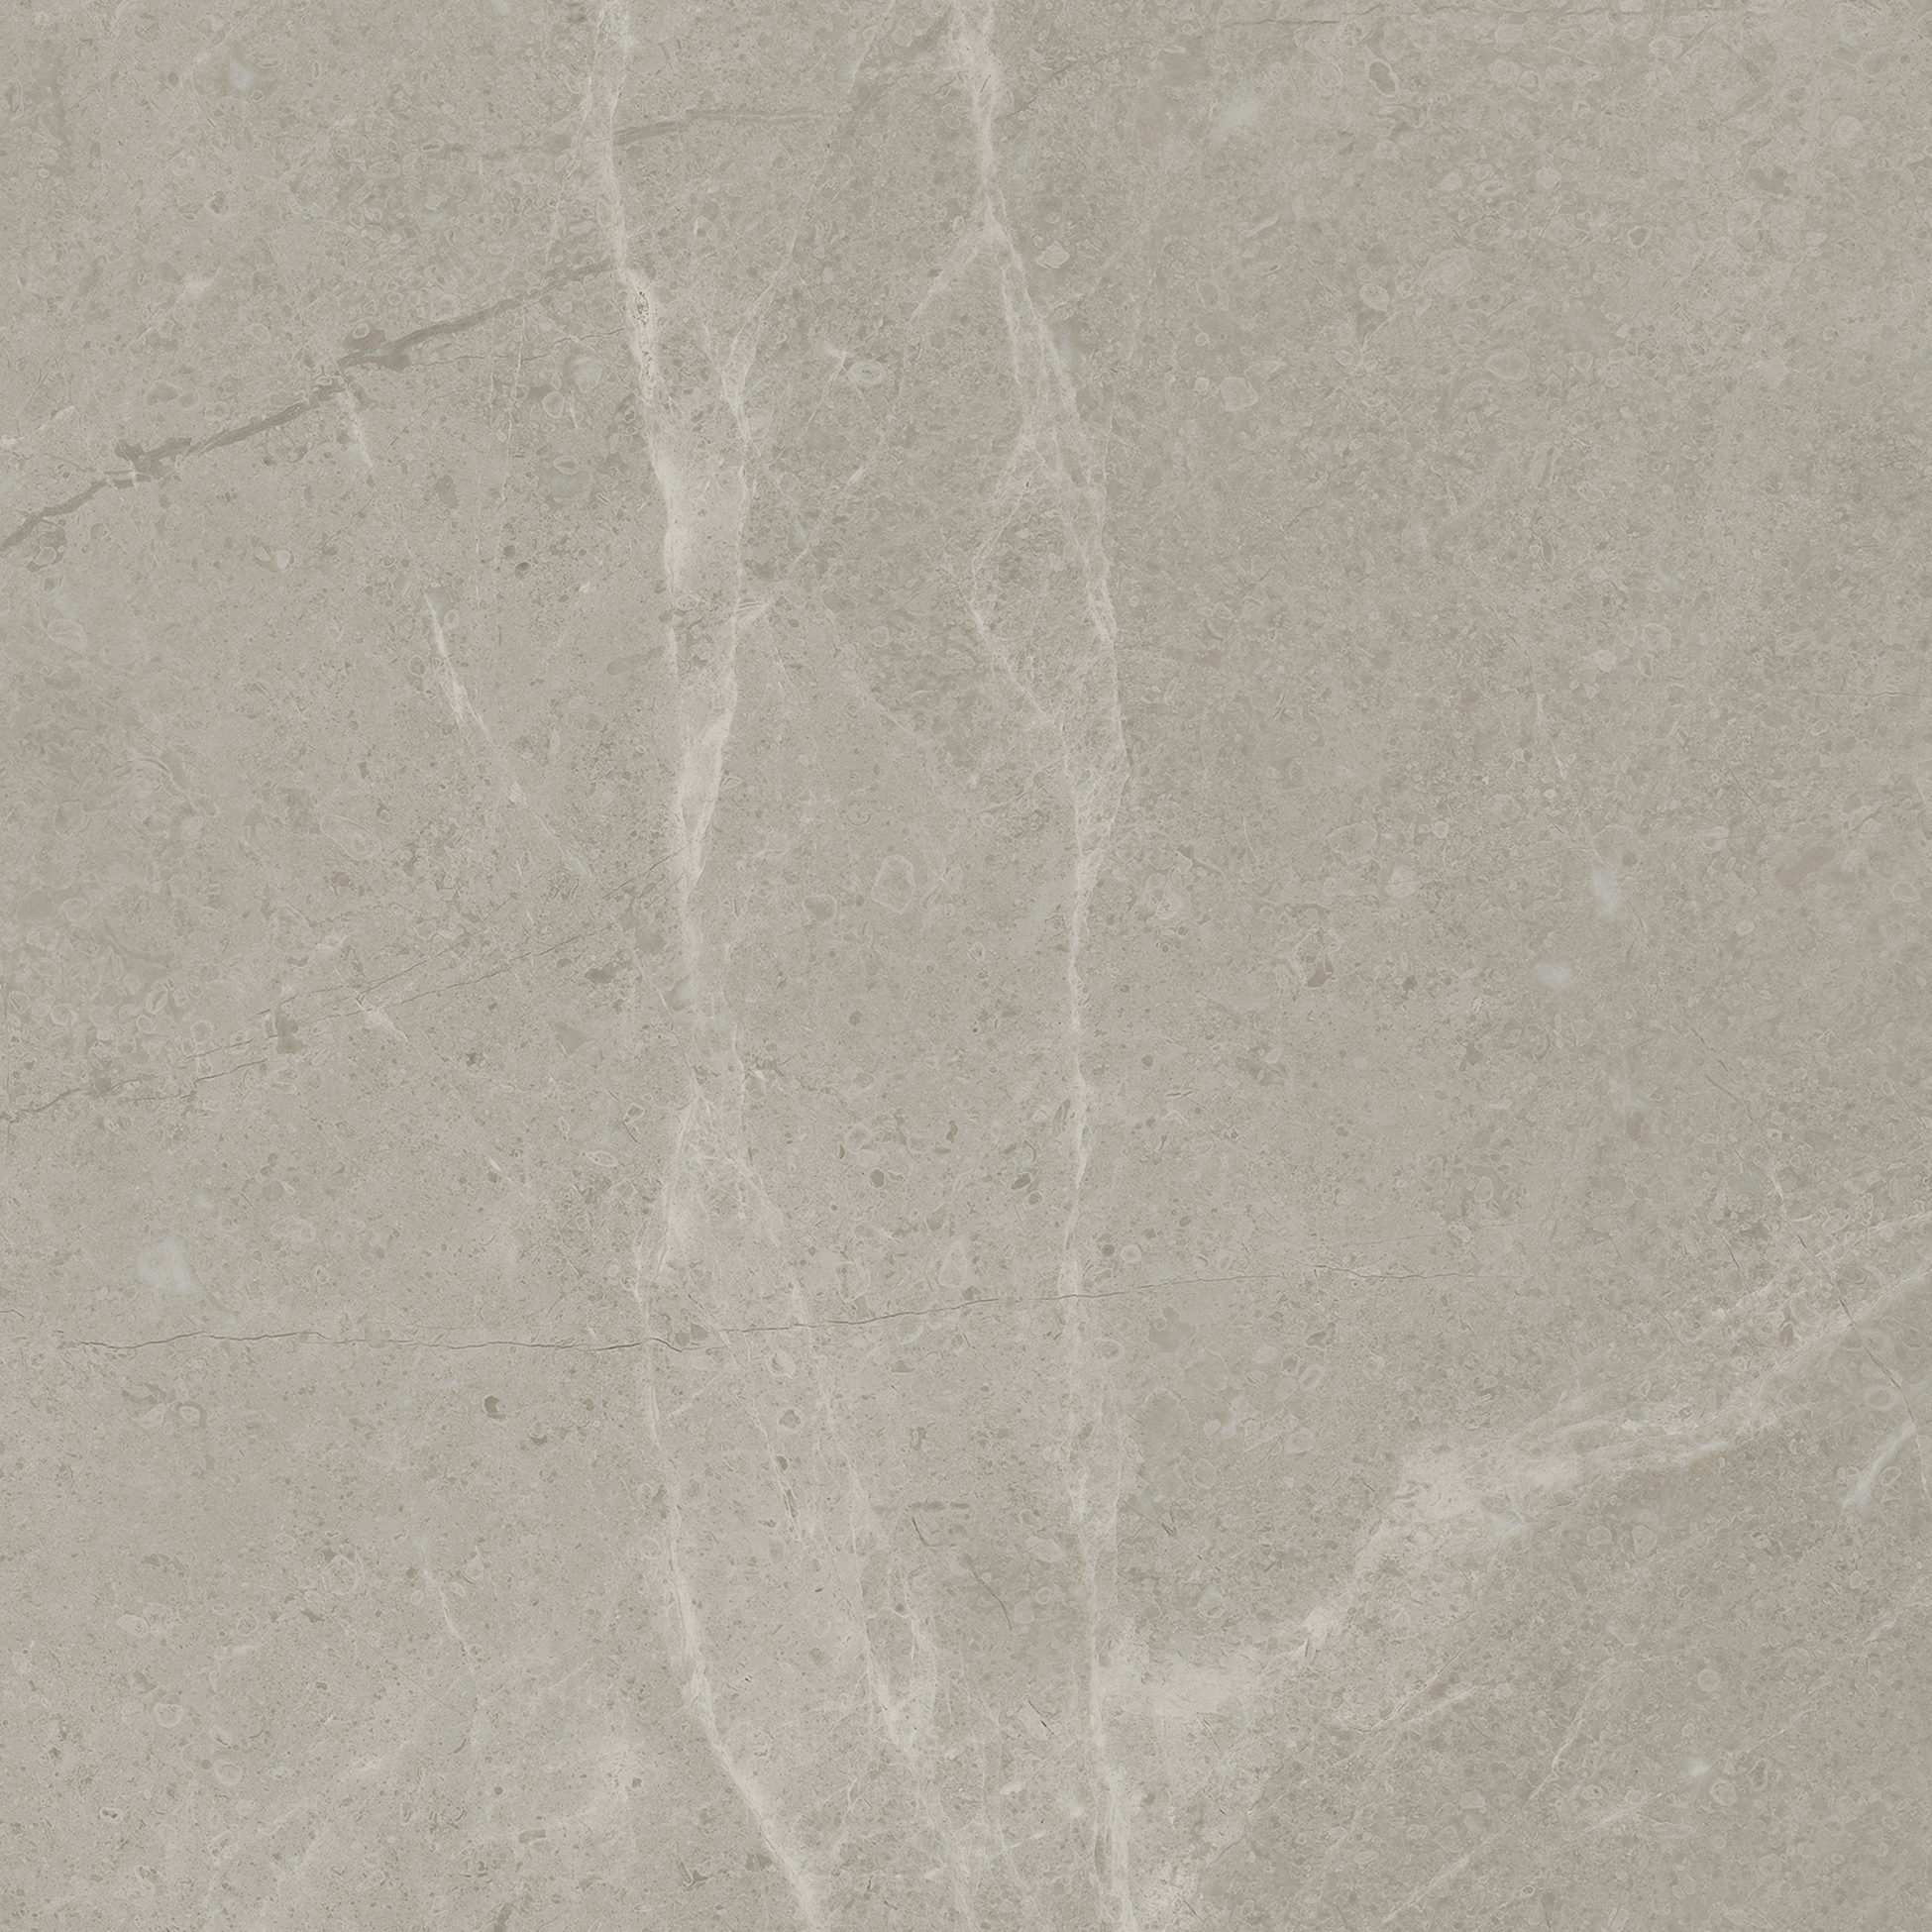 vanizio pattern glazed porcelain field tile from torino anatolia collection distributed by surface group international matte finish pressed edge 13x13 square shape